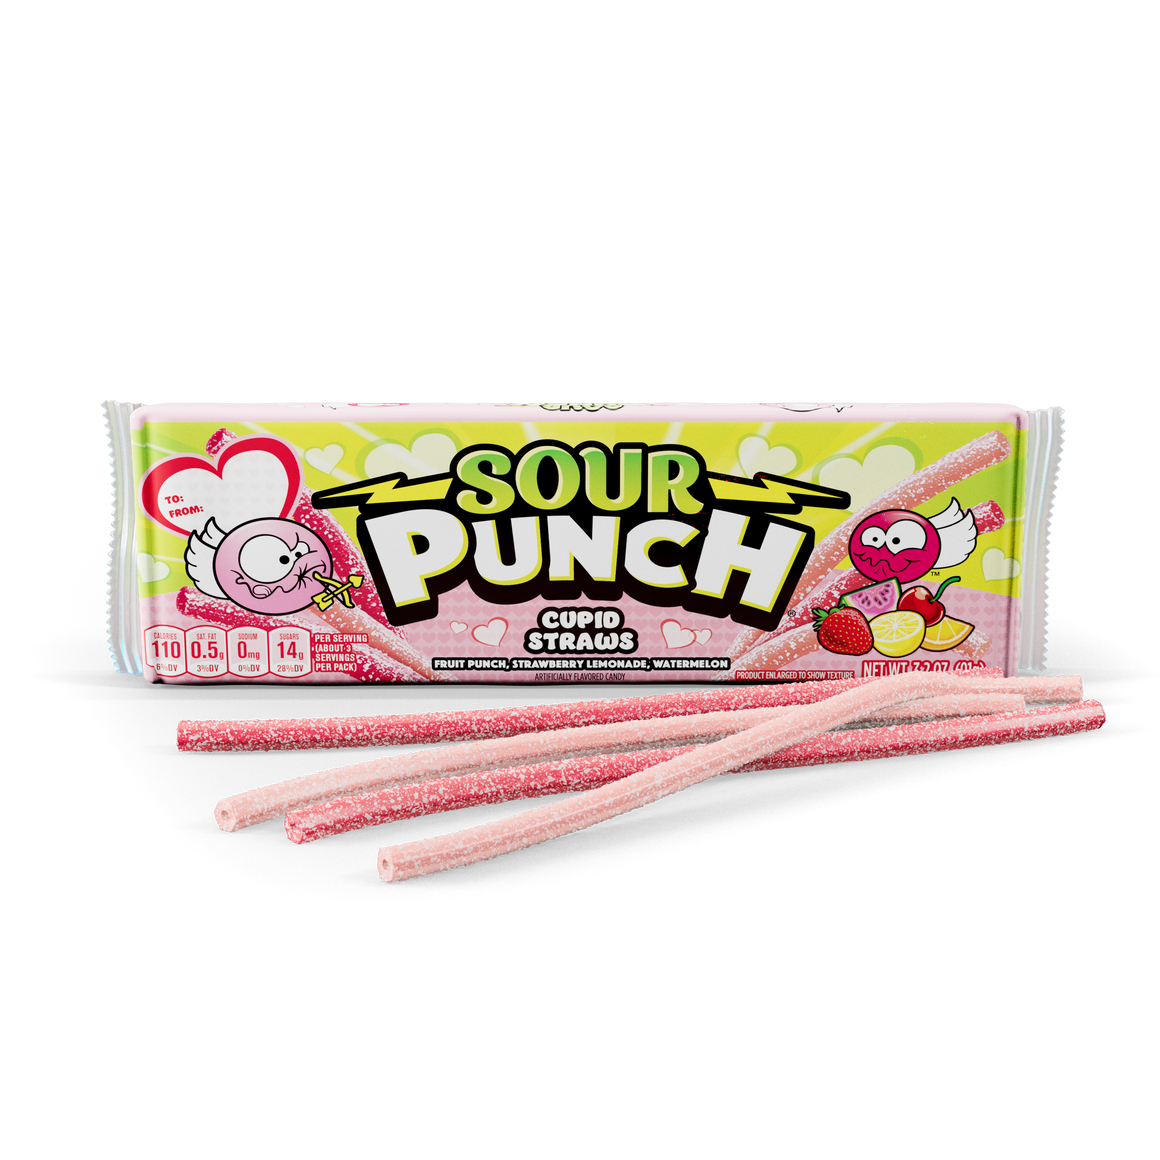 All City Candy Sour Punch Valentines Cupid Straws 3.2 oz. Tray Valentine's Day American Licorice Company For fresh candy and great service, visit www.allcitycandy.com